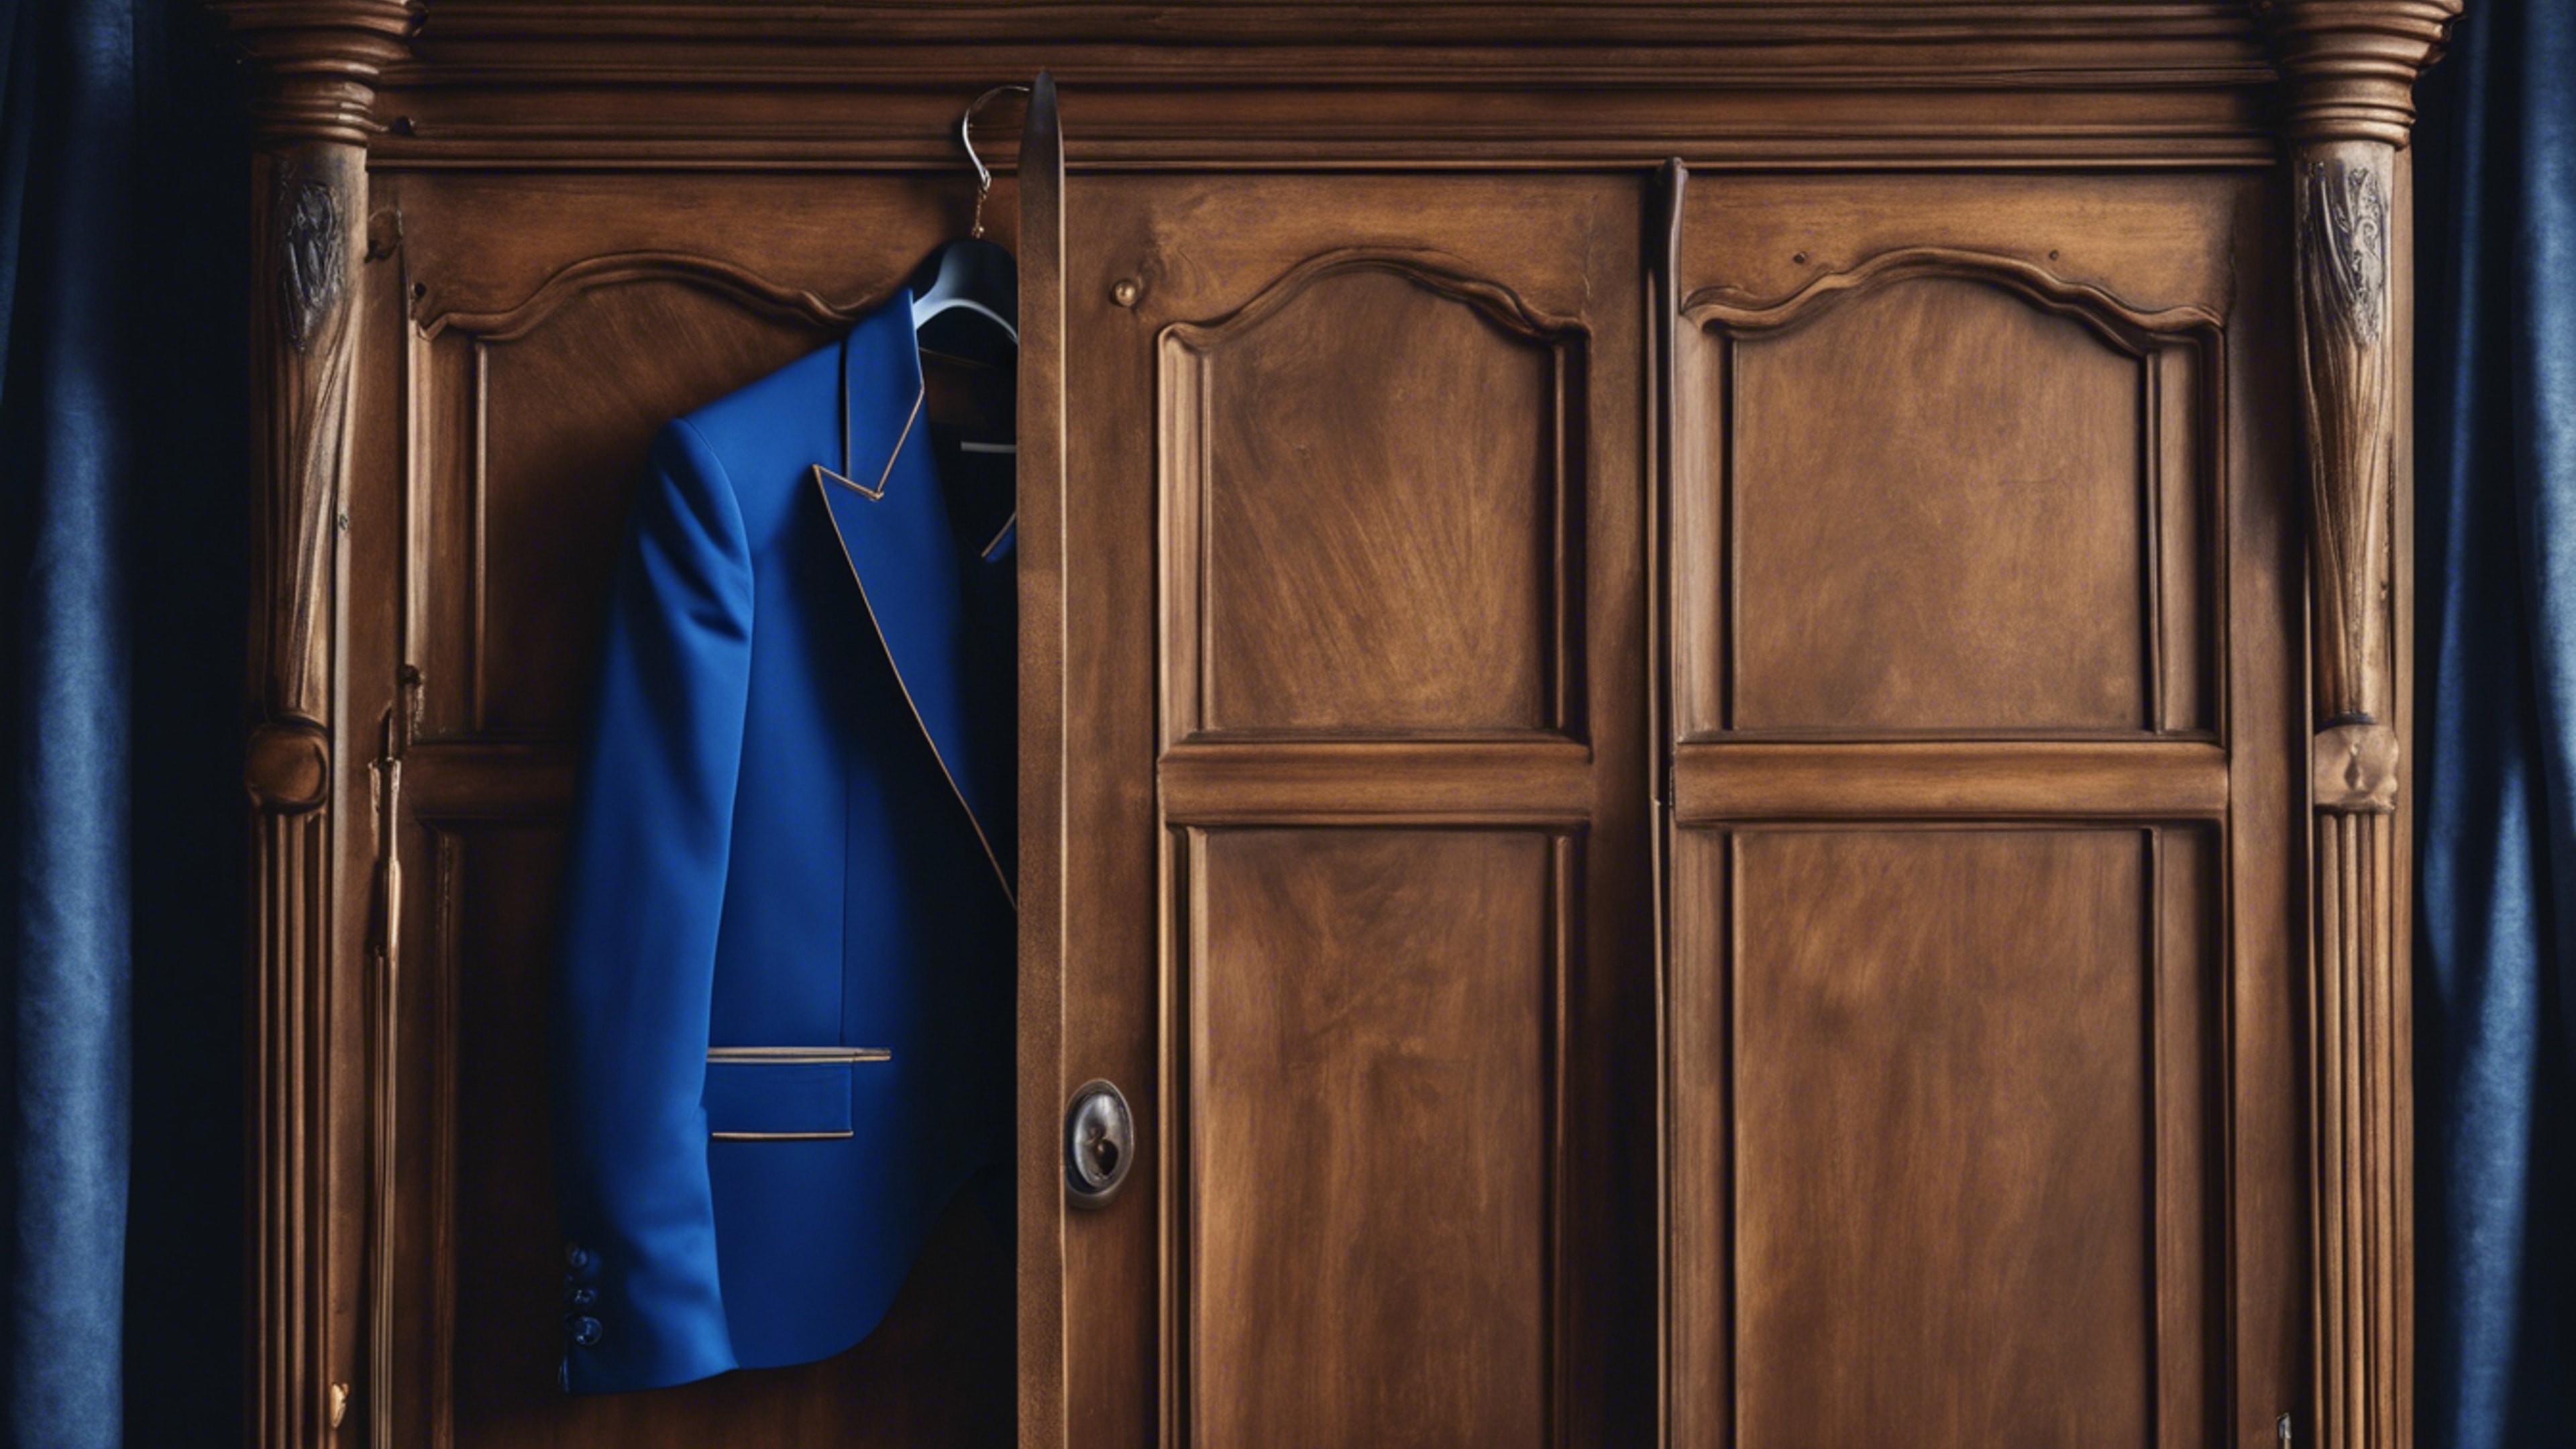 A vintage royal blue tuxedo hanging in a classic antique wardrobe. Тапет[1e18aa866c984257b969]